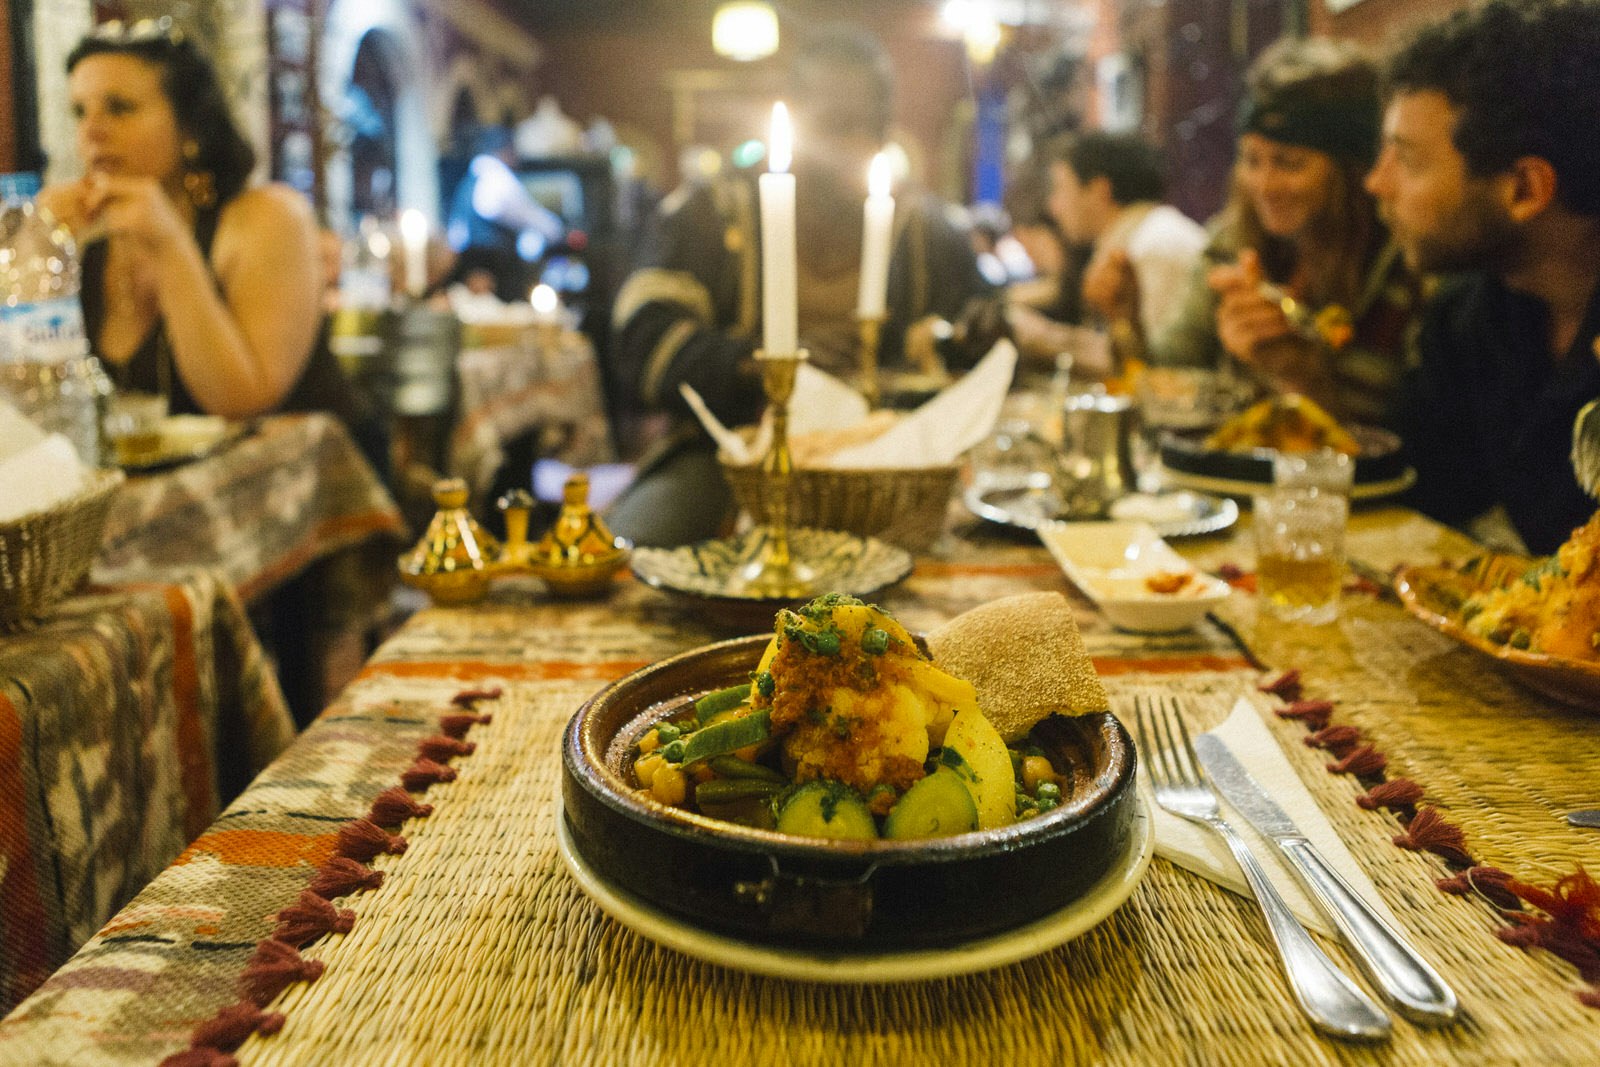 Tagine at Adwak, Essaouira, Morocco © Chris Griffiths / Lonely Planet